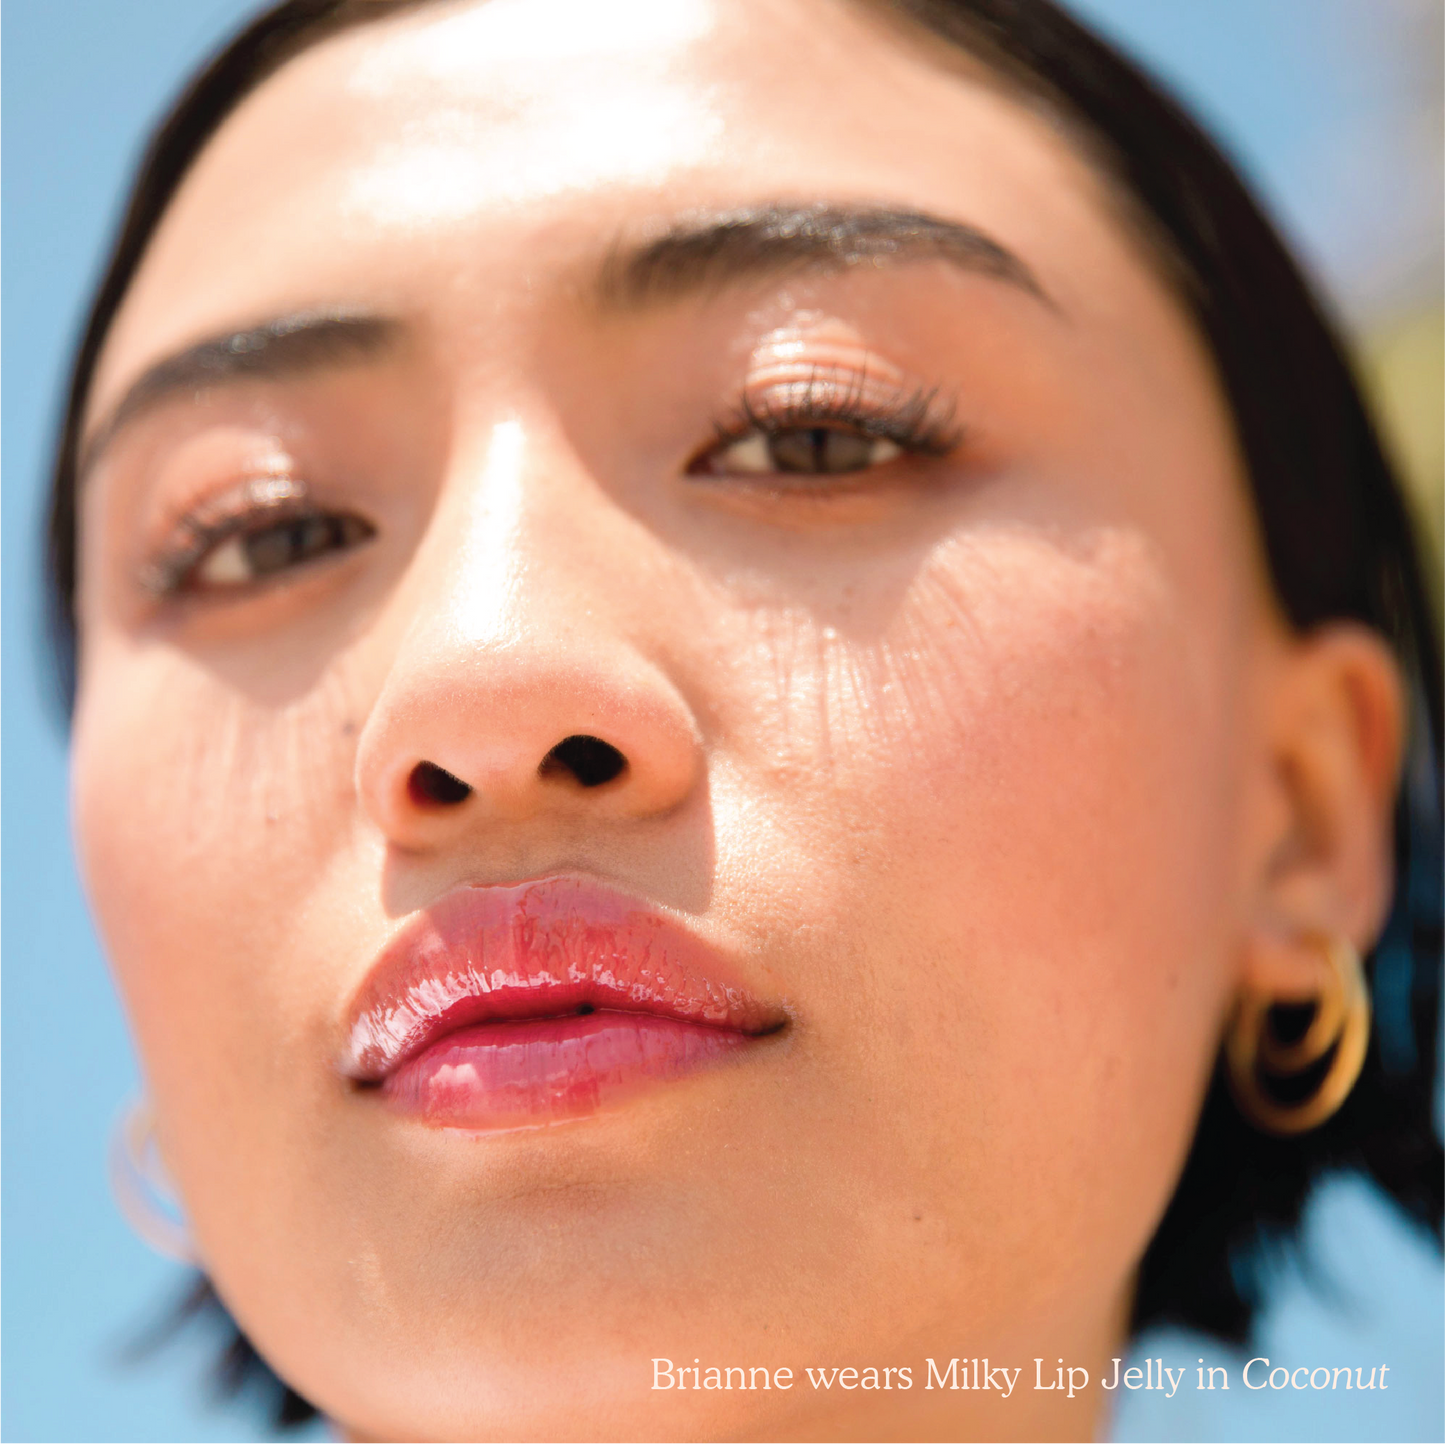 [Shared - Closeup photo of a girl with very glossy lips, wearing the Tower 28 Beauty ShineOn Milky Lip Jelly shade in Coconut (a milky mauve-pink)]